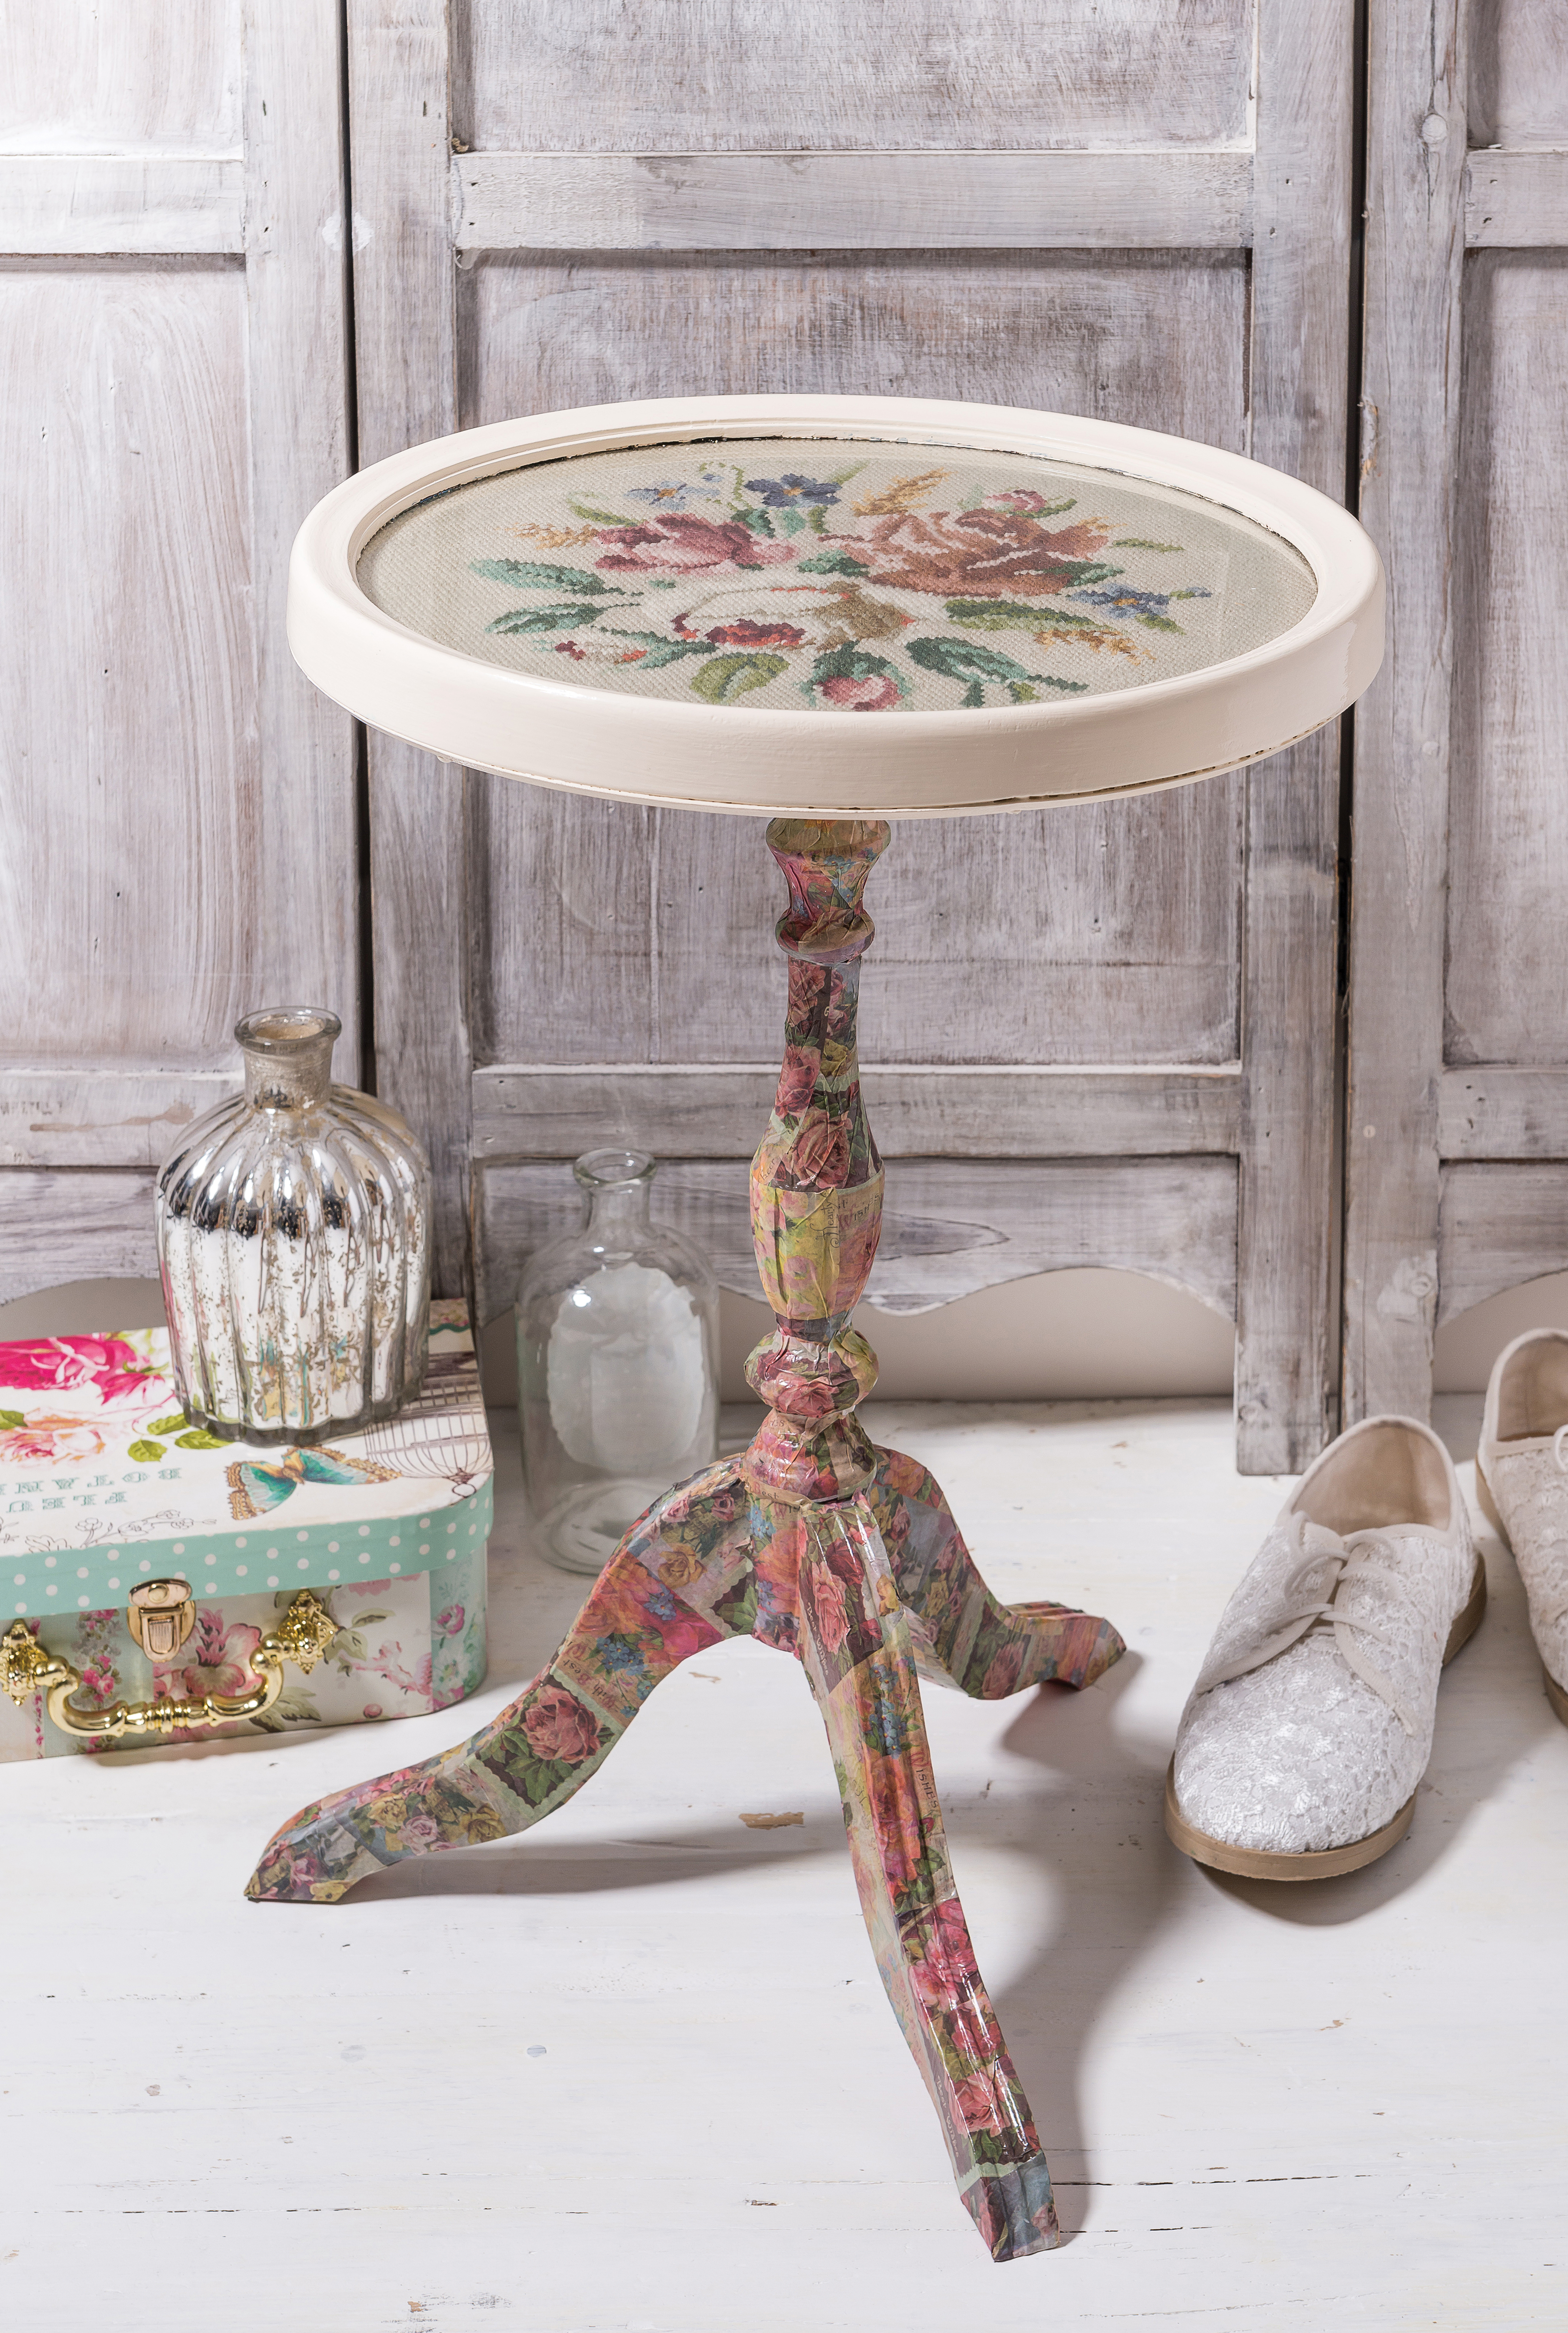 How to découpage a table – upcycling old furniture